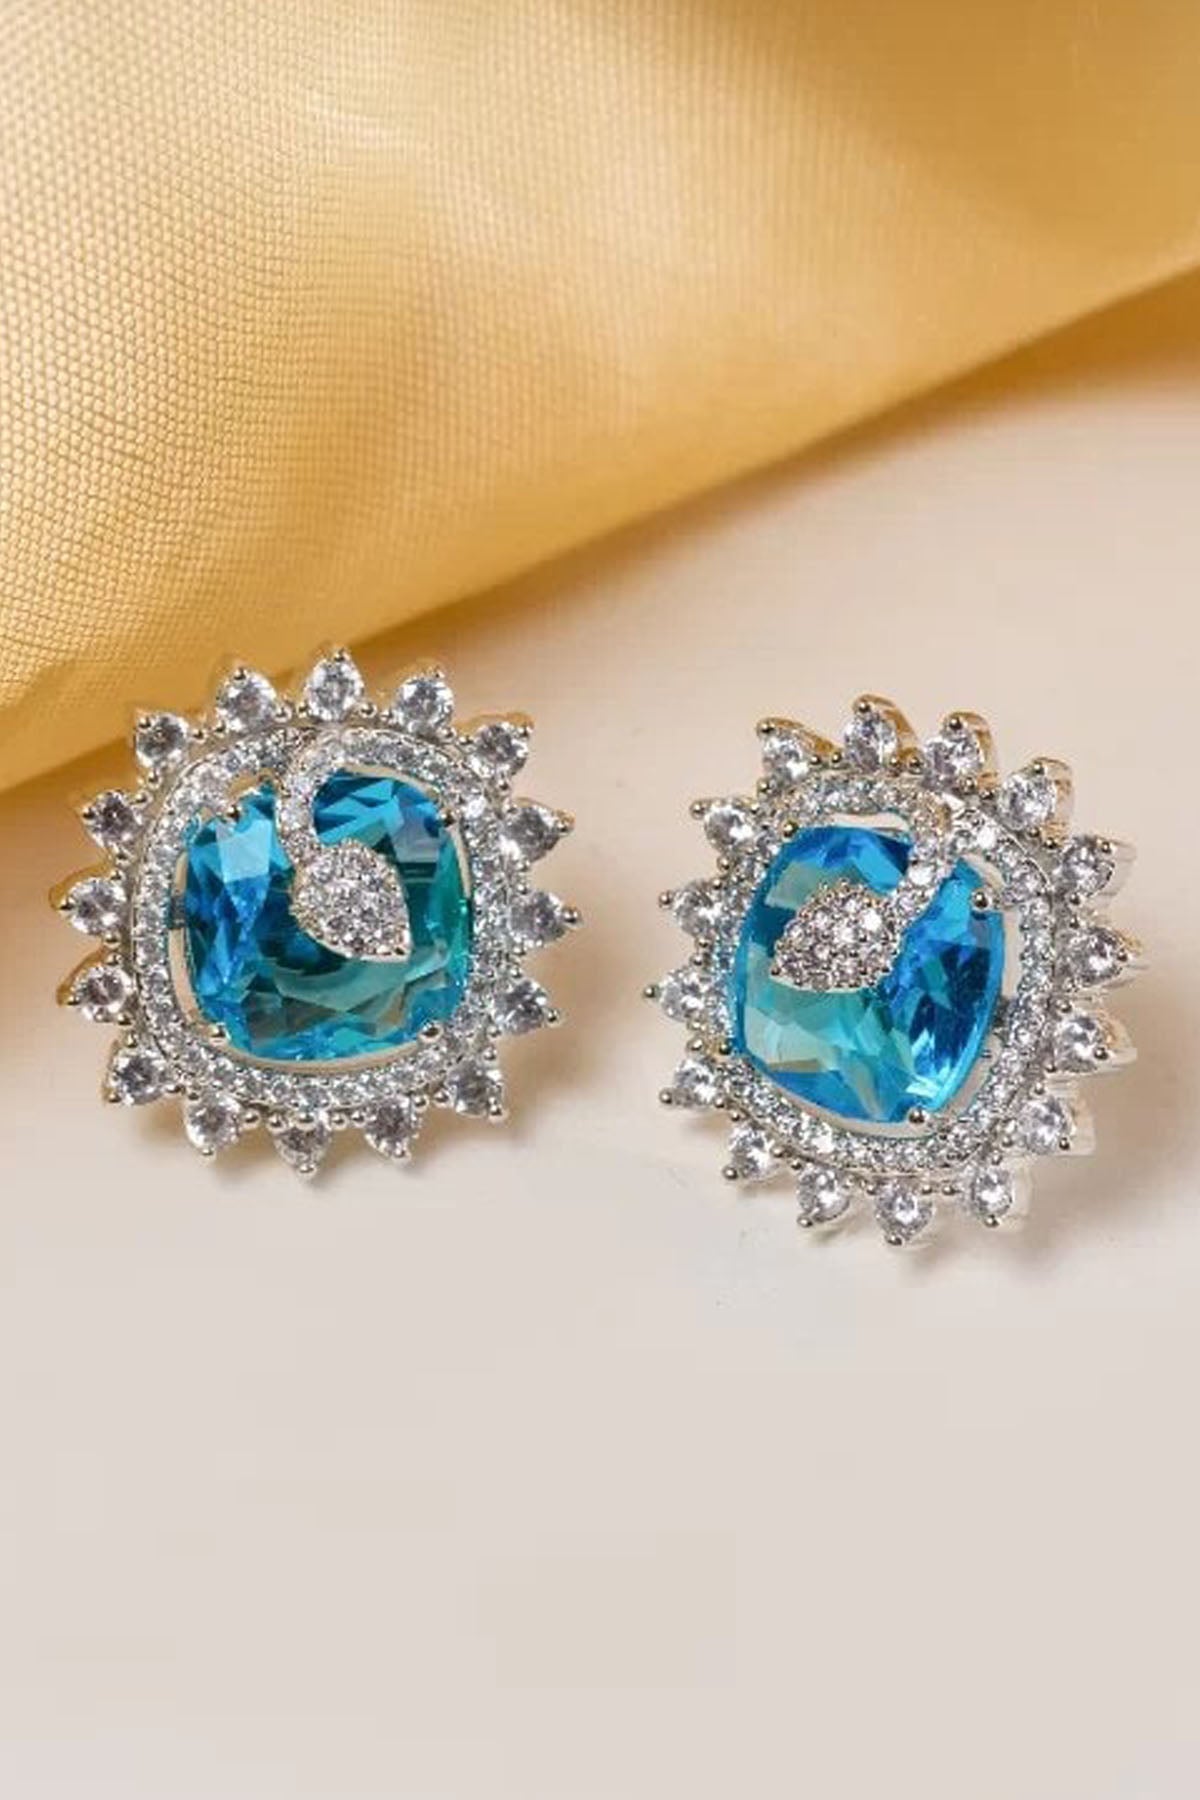 Blue Crystal Stud Earrings of Brand Putstyle Available online at ScrollnShops